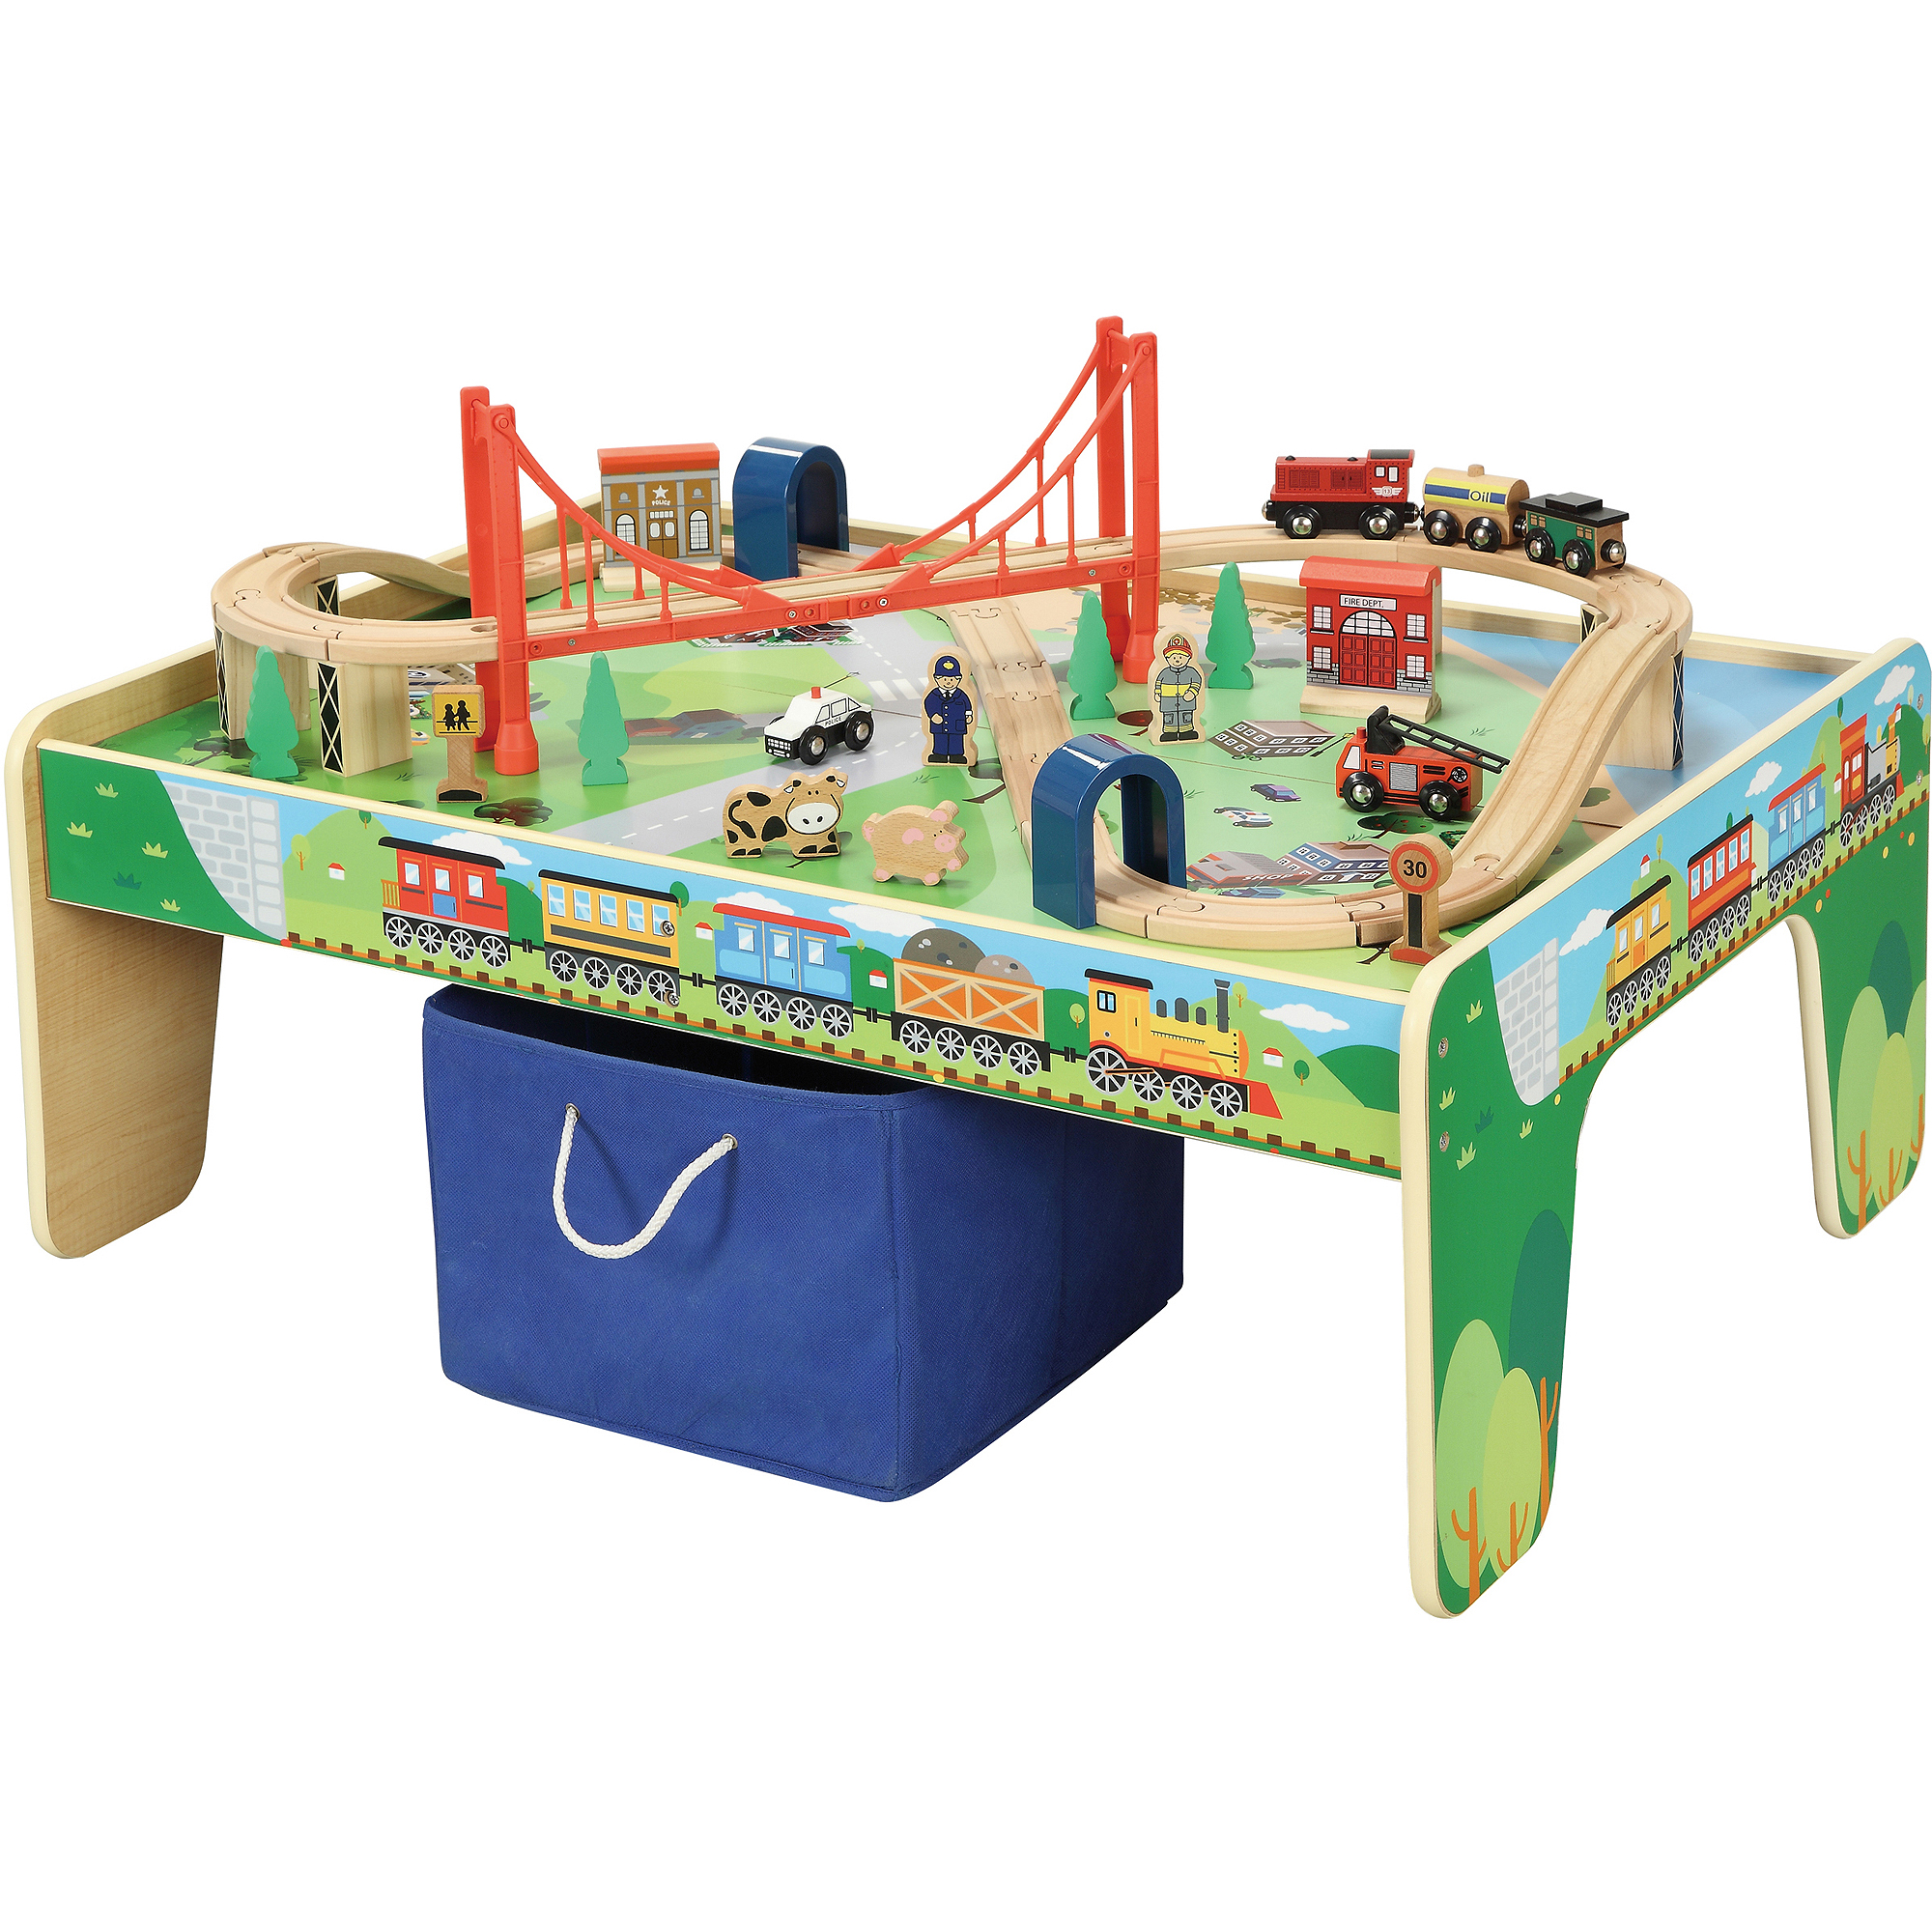 Wooden 50-Piece Train Set with Small Table Only At Walmart - image 1 of 3